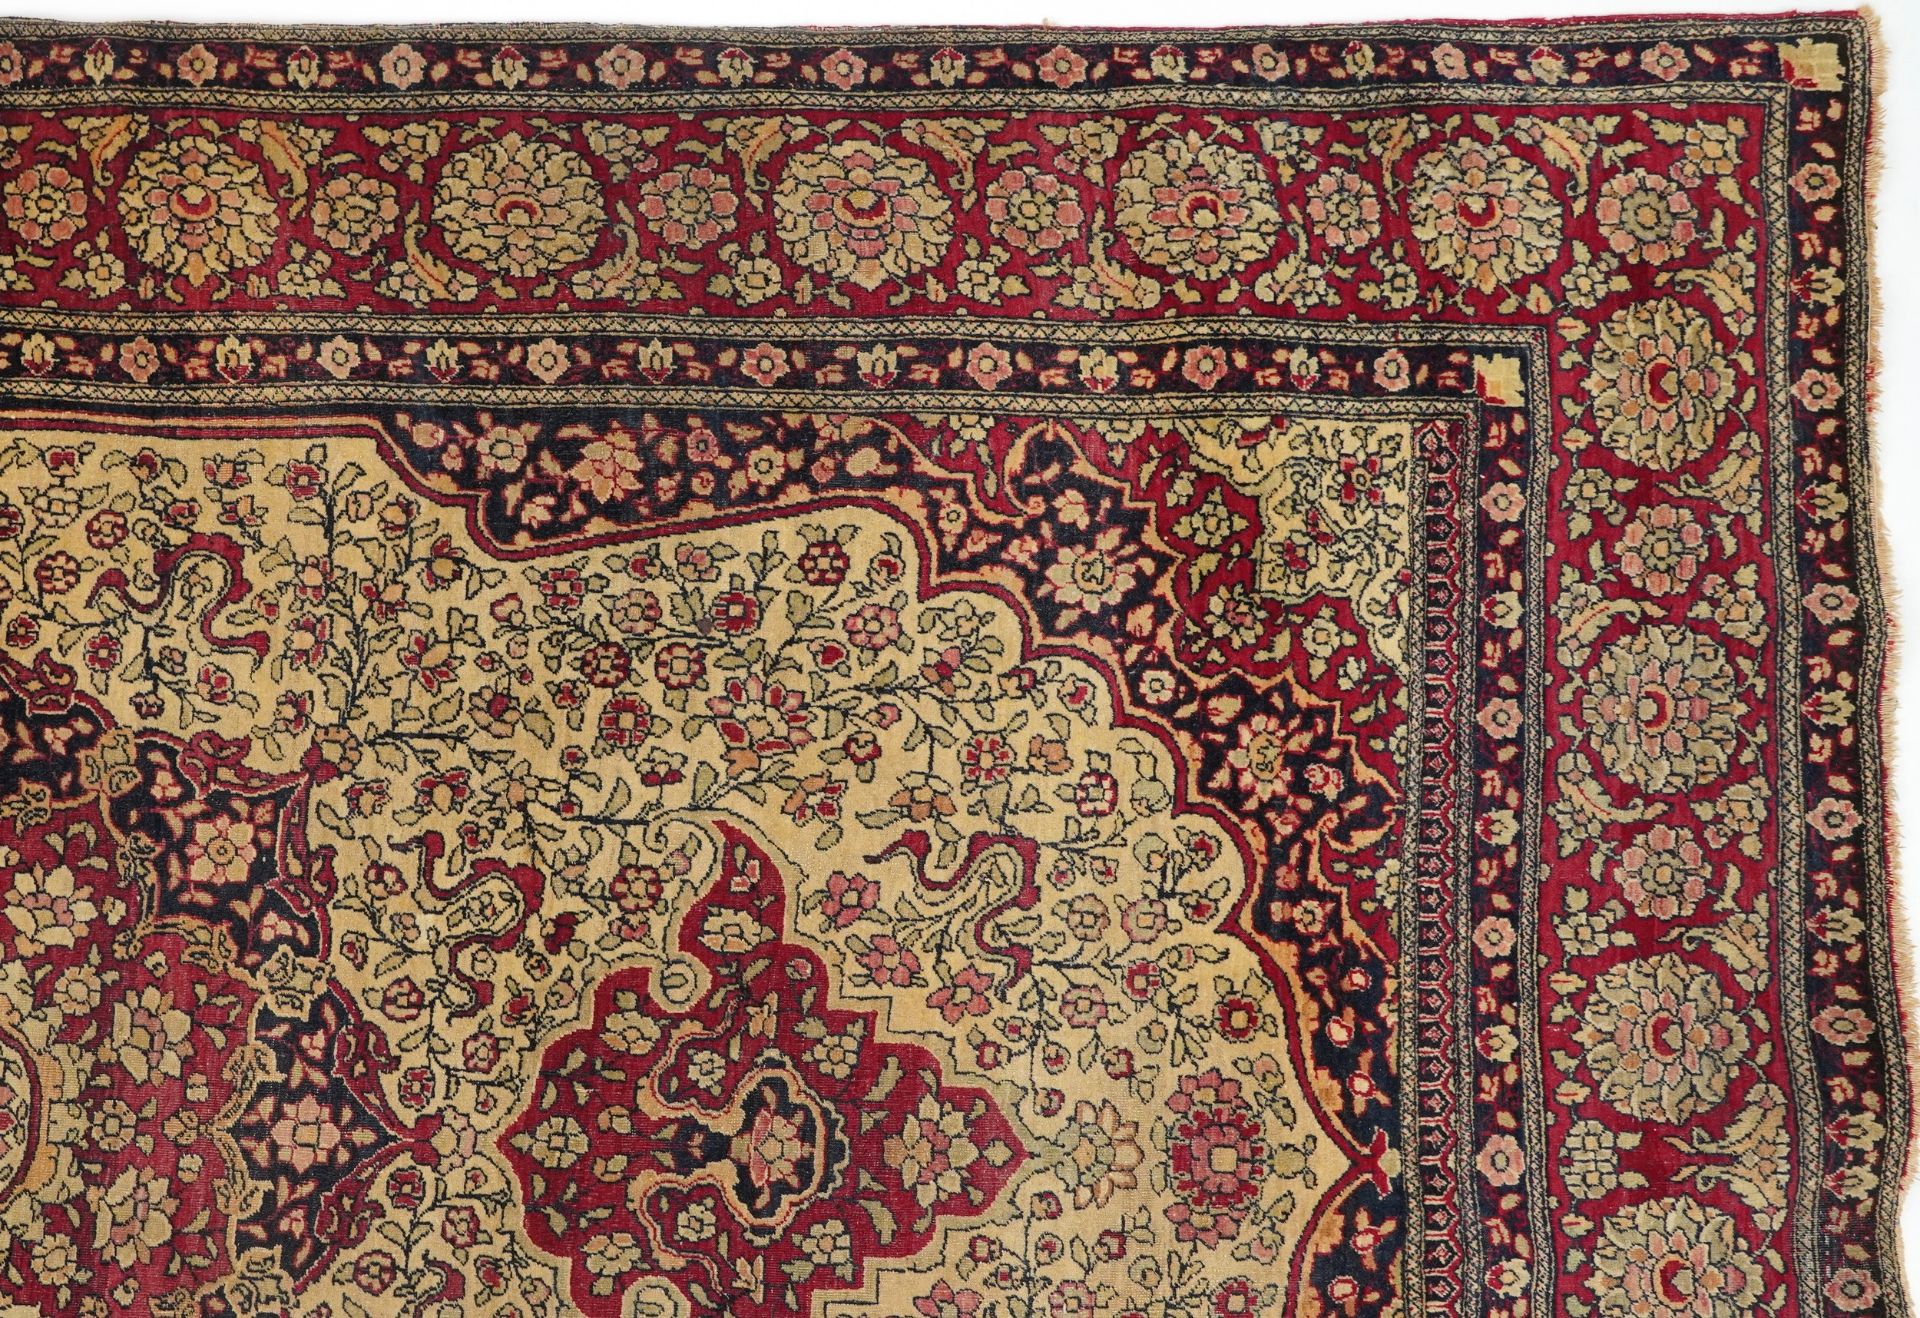 Rectangular Persian red ground rug having and allover repeat floral design, 227cm x 141cm - Image 3 of 6